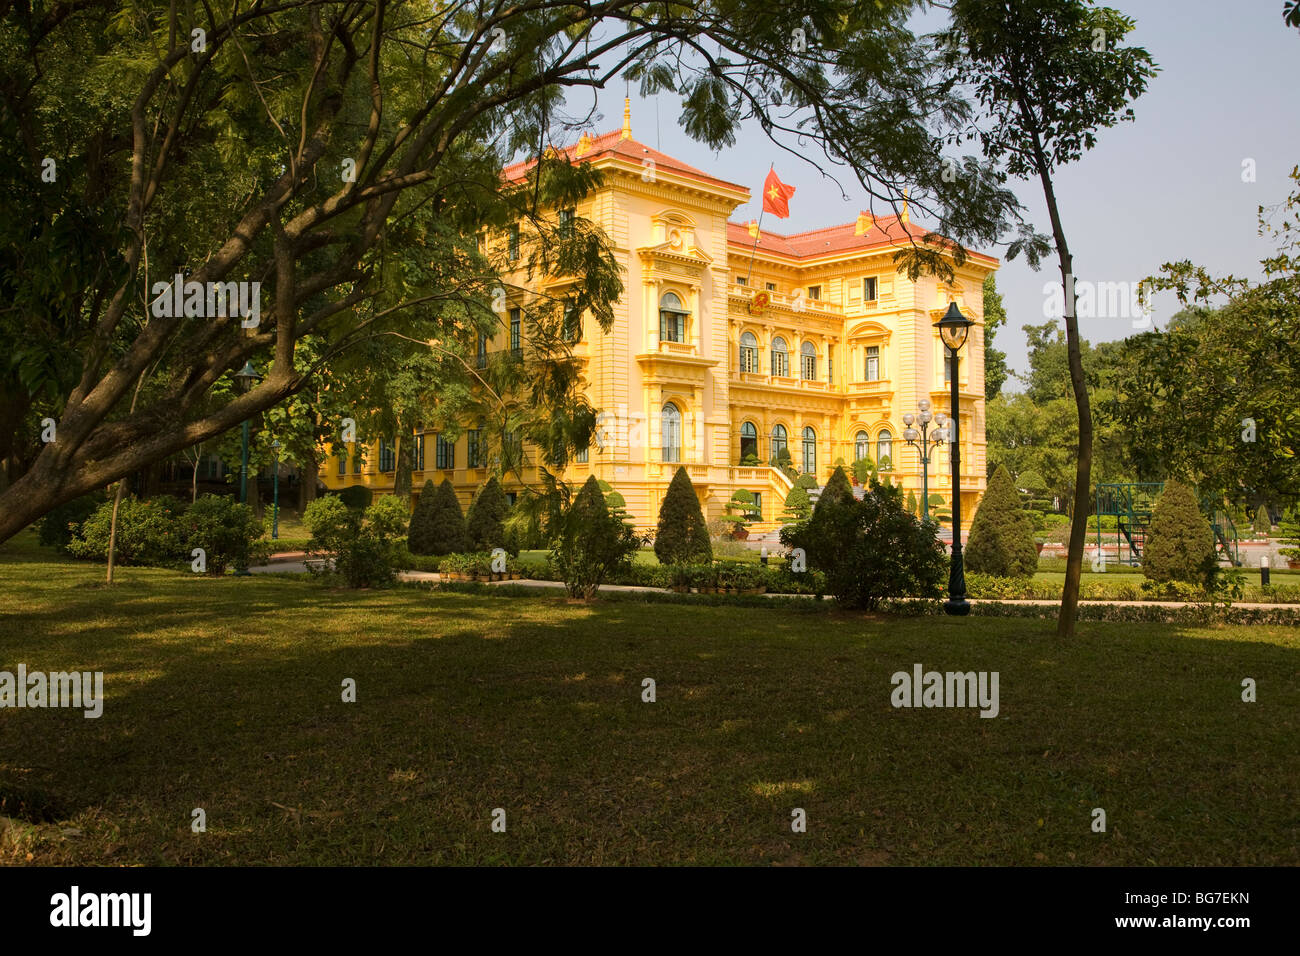 The Presidential Palace (formerly Indochina's General Governor Palace) Hanoi, Vietnam Stock Photo